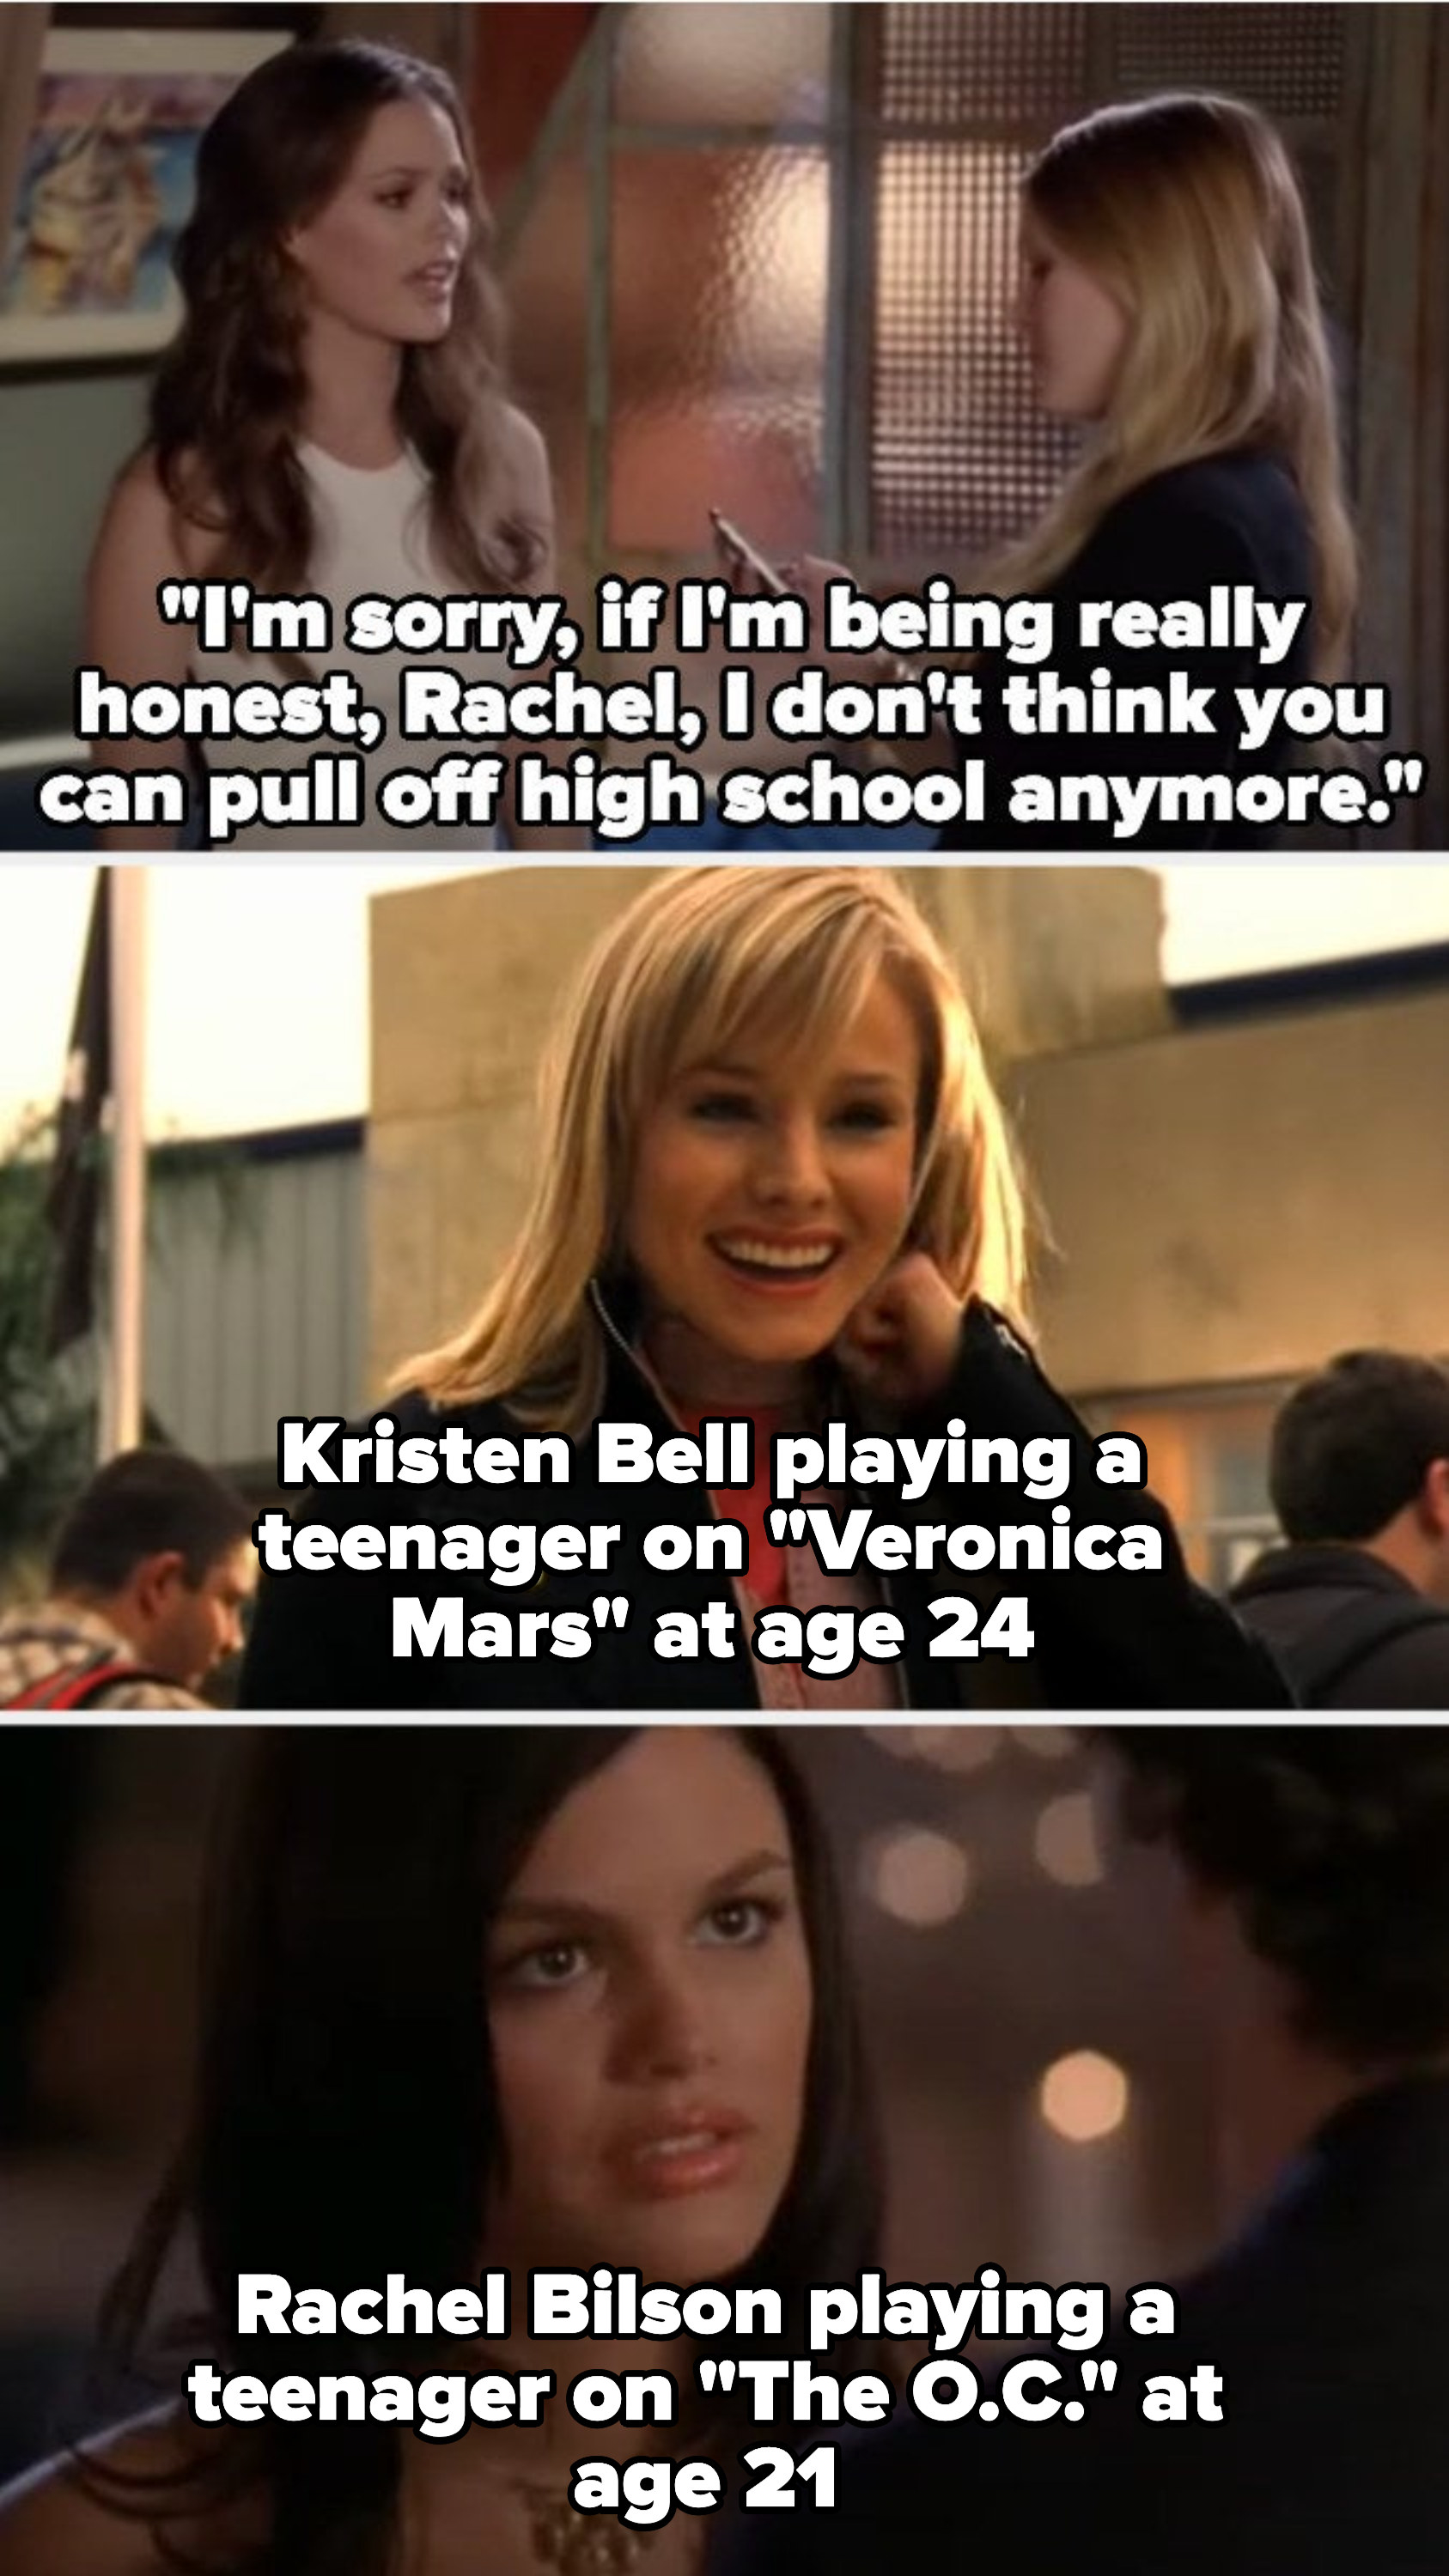 Kristen tells Rachel &quot;I don&#x27;t think you can pull off high school anymore&quot; and then there are photos of Kristen Bell playing at a teen on Veronica Mars at age 24 and Rachel Bilson playing a teen on The OC at age 24